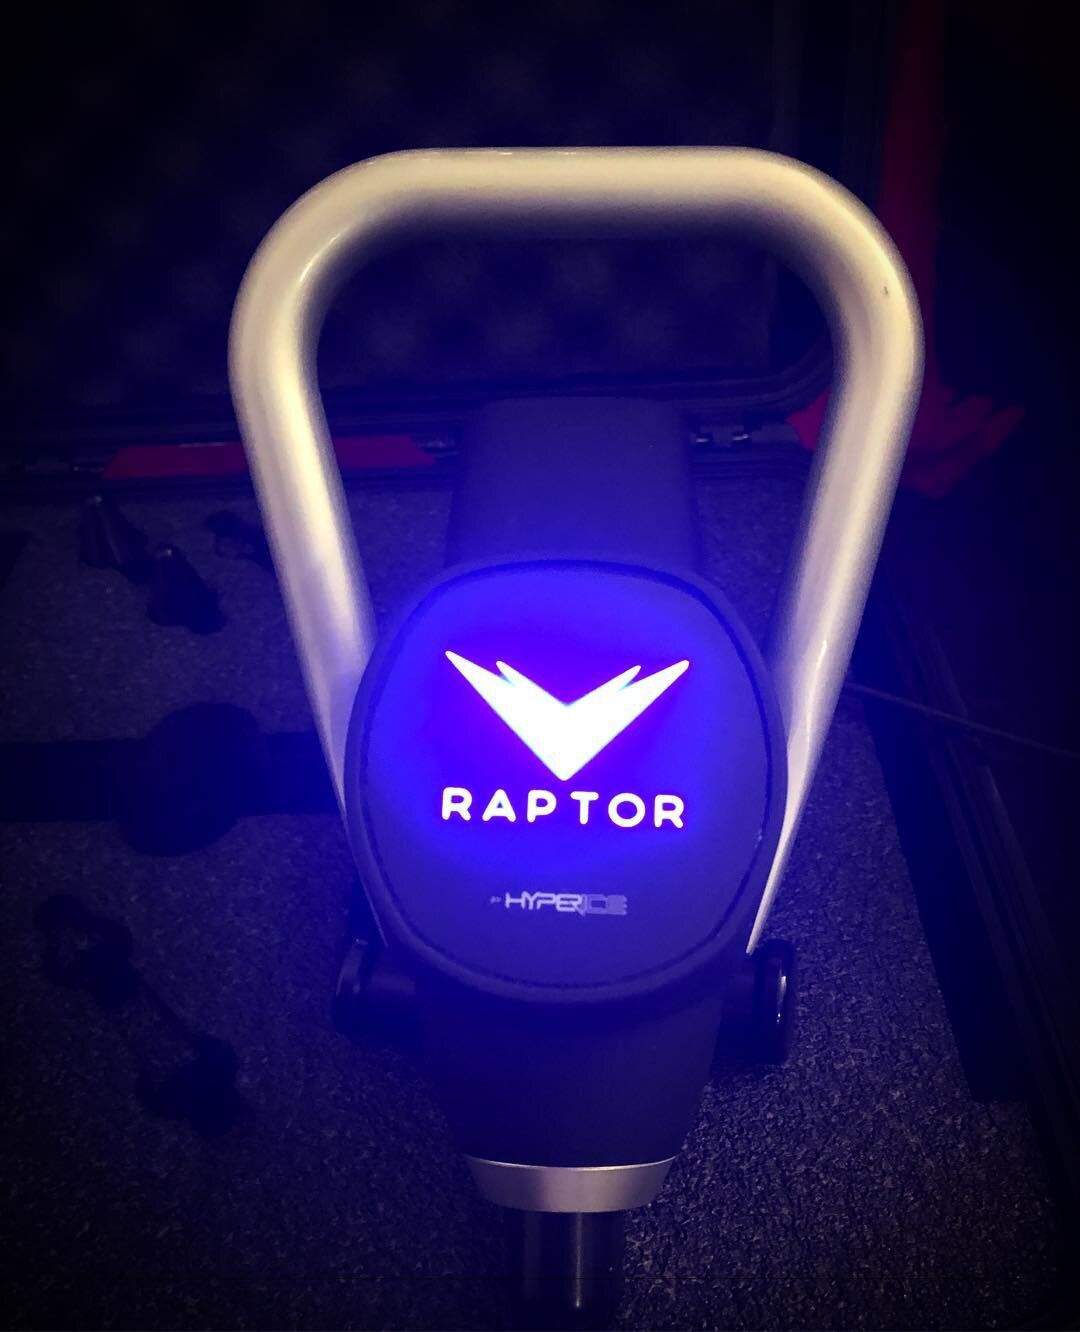 You&rsquo;ve seen the HAMMER. Meet its new buddy....the RAPTOR! Thank you so much @hyperice! We are going to put this to good use!😍 #sportsmedicine #chiropractic #kearnymesa #earlychristmas #chiropractor #procare #hyperice #getoutofpain #health #rec